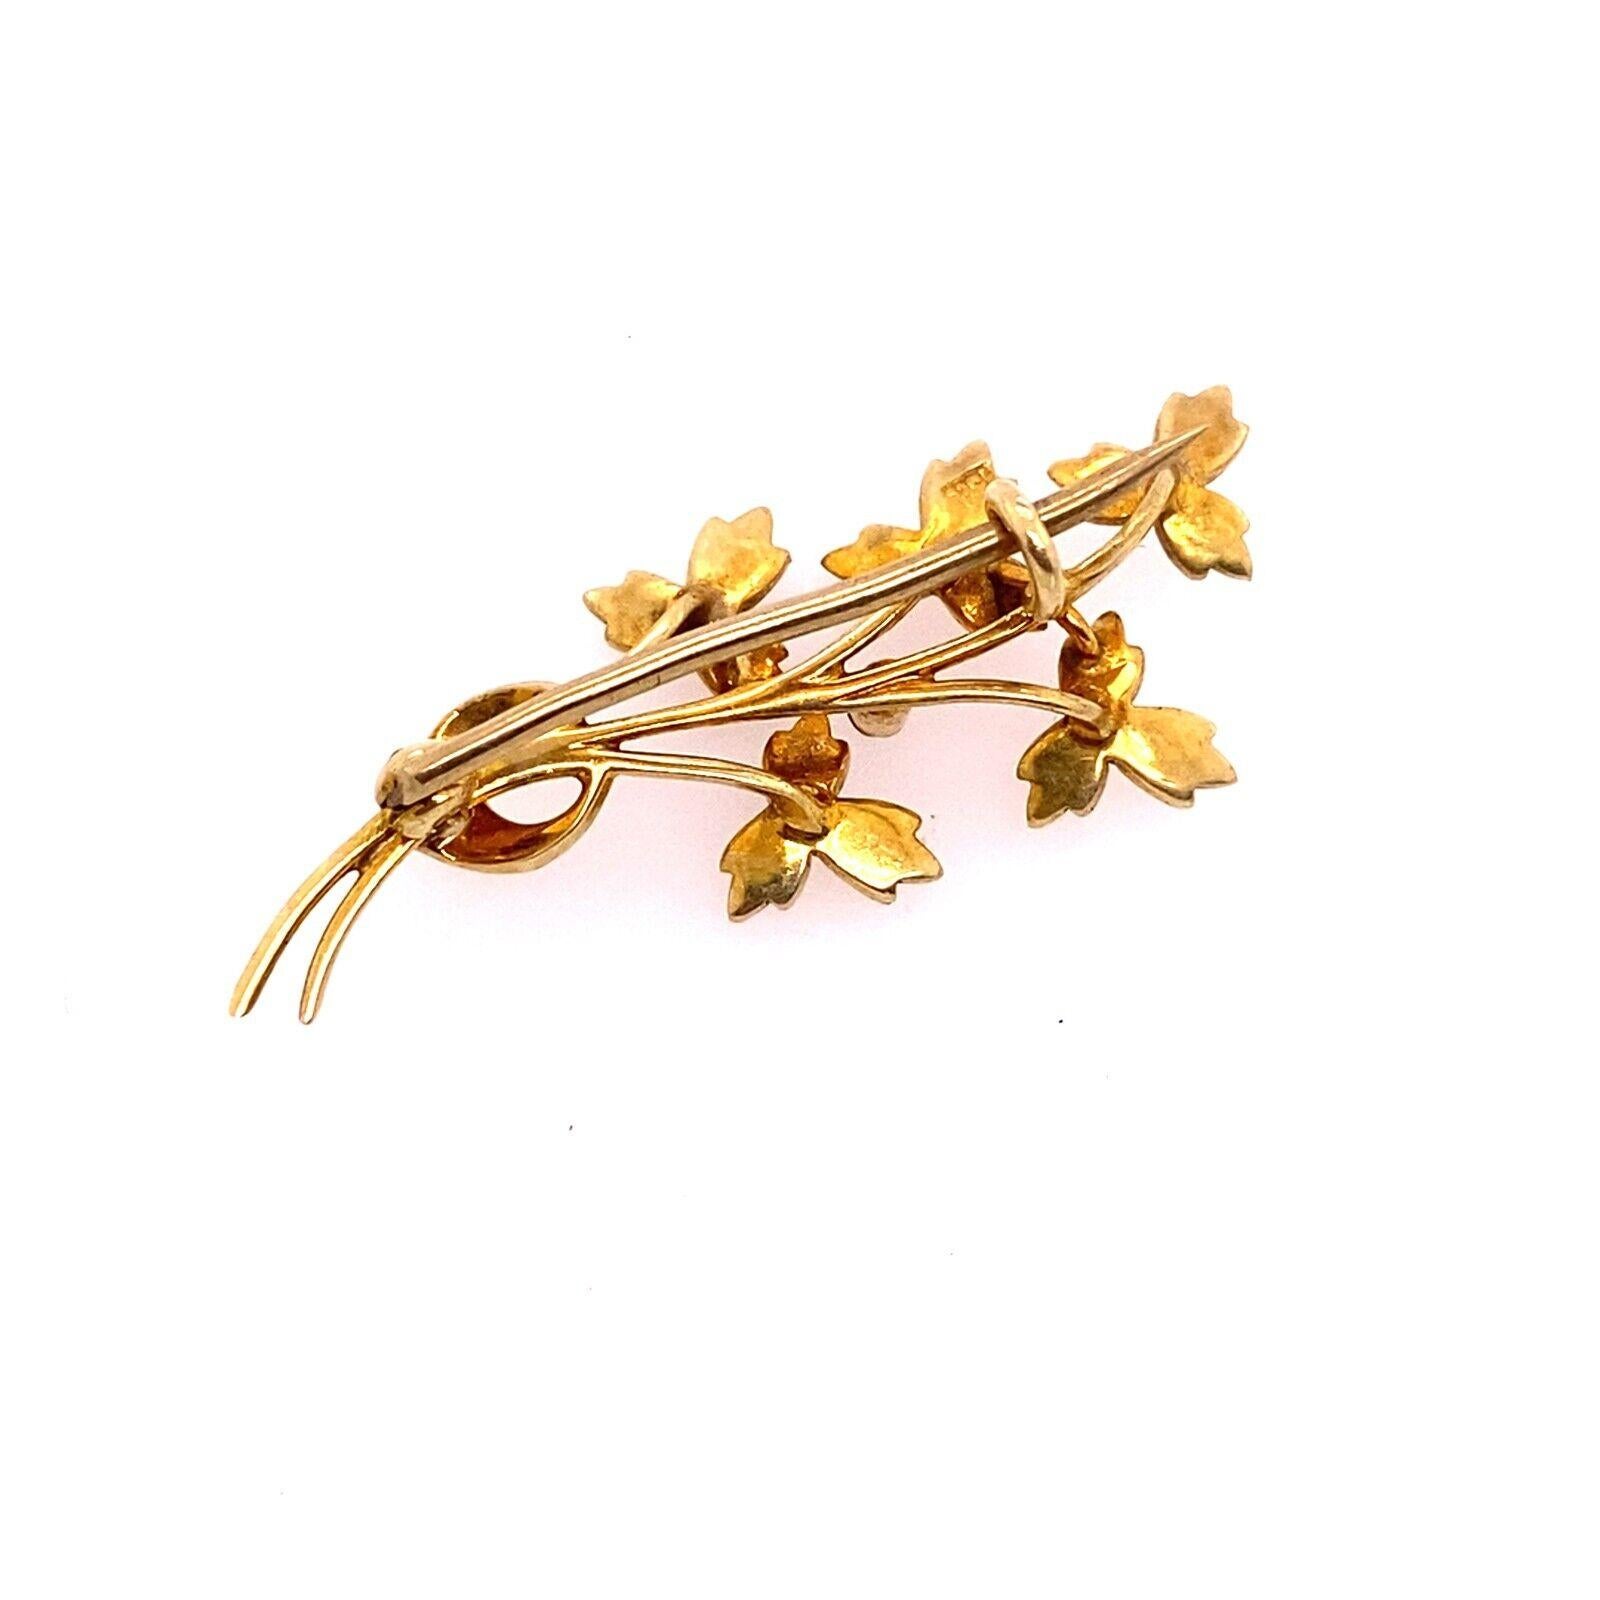 This antique spray brooch is made of 15ct gold and features 21 seed pearls. This brooch is a great way to add a touch of elegance to any outfit.

Additional Information: 
Total Weight: 3.5g
Brooch Dimension: 39.43mm x 14.70mm
Pin & Hook